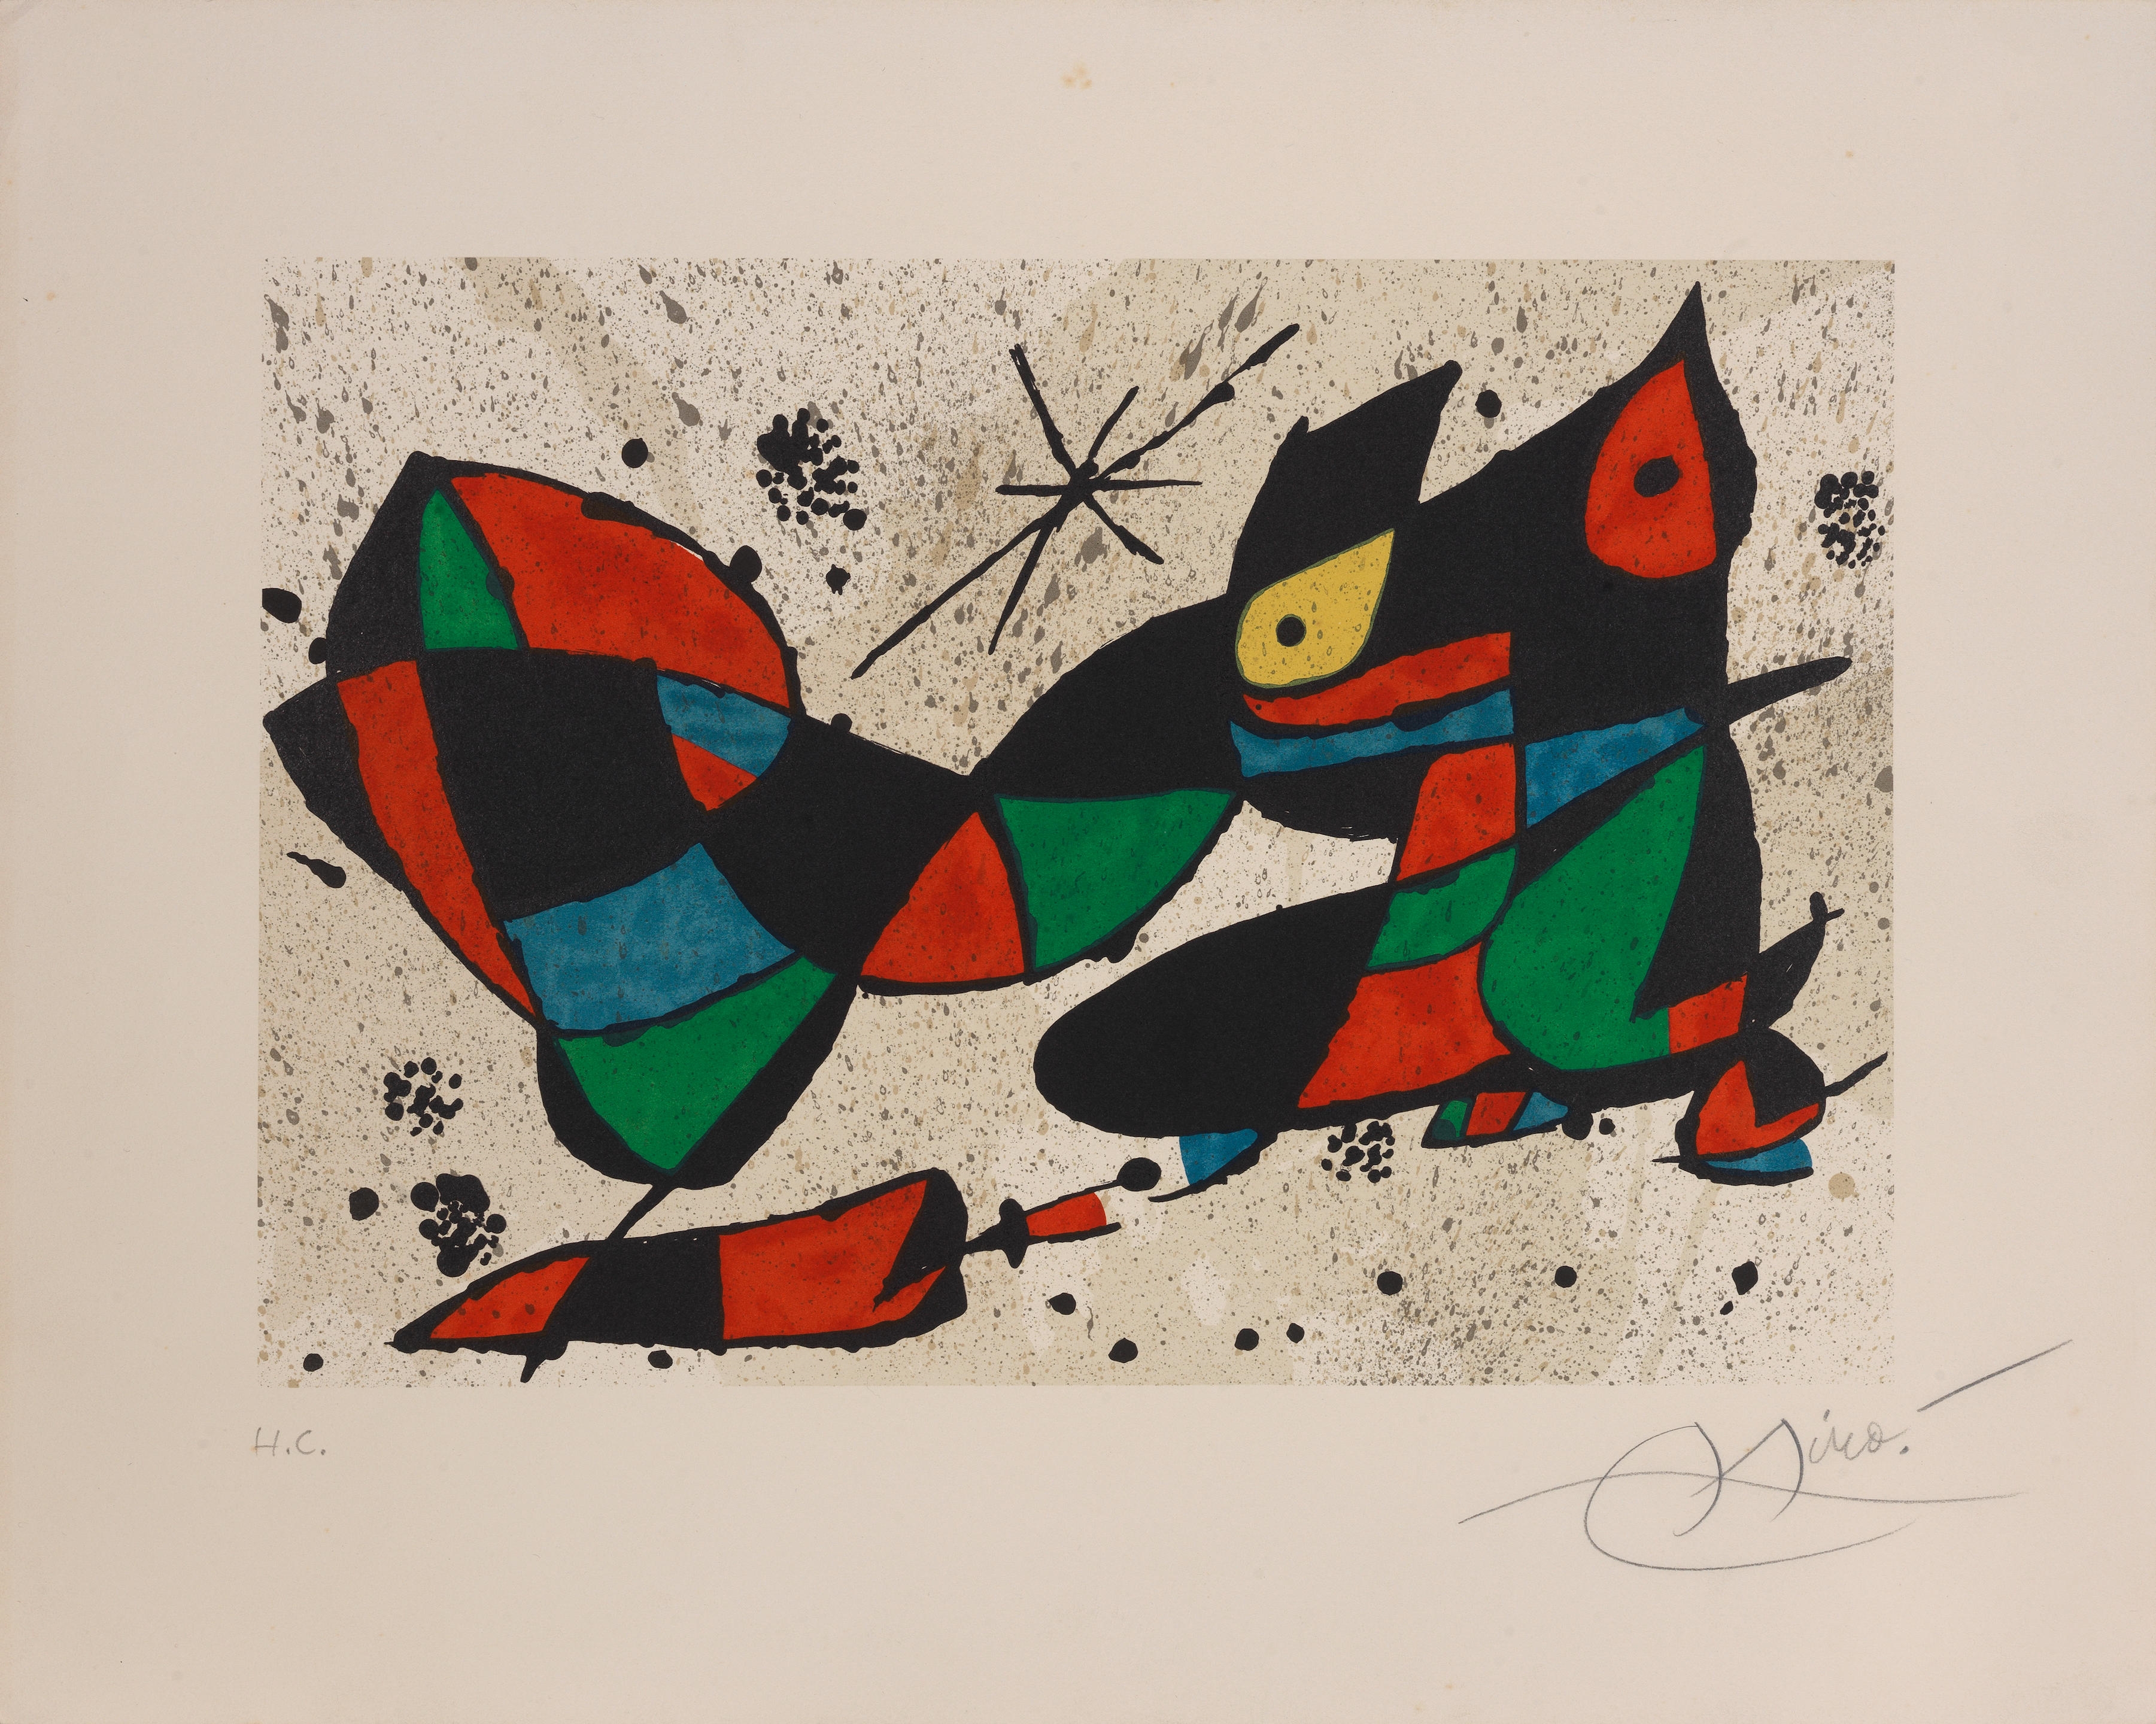 Artwork by Joan Miró, Joan Miró. Obra Gráfica, Made of lithograph in colours, 1978, on wove paper